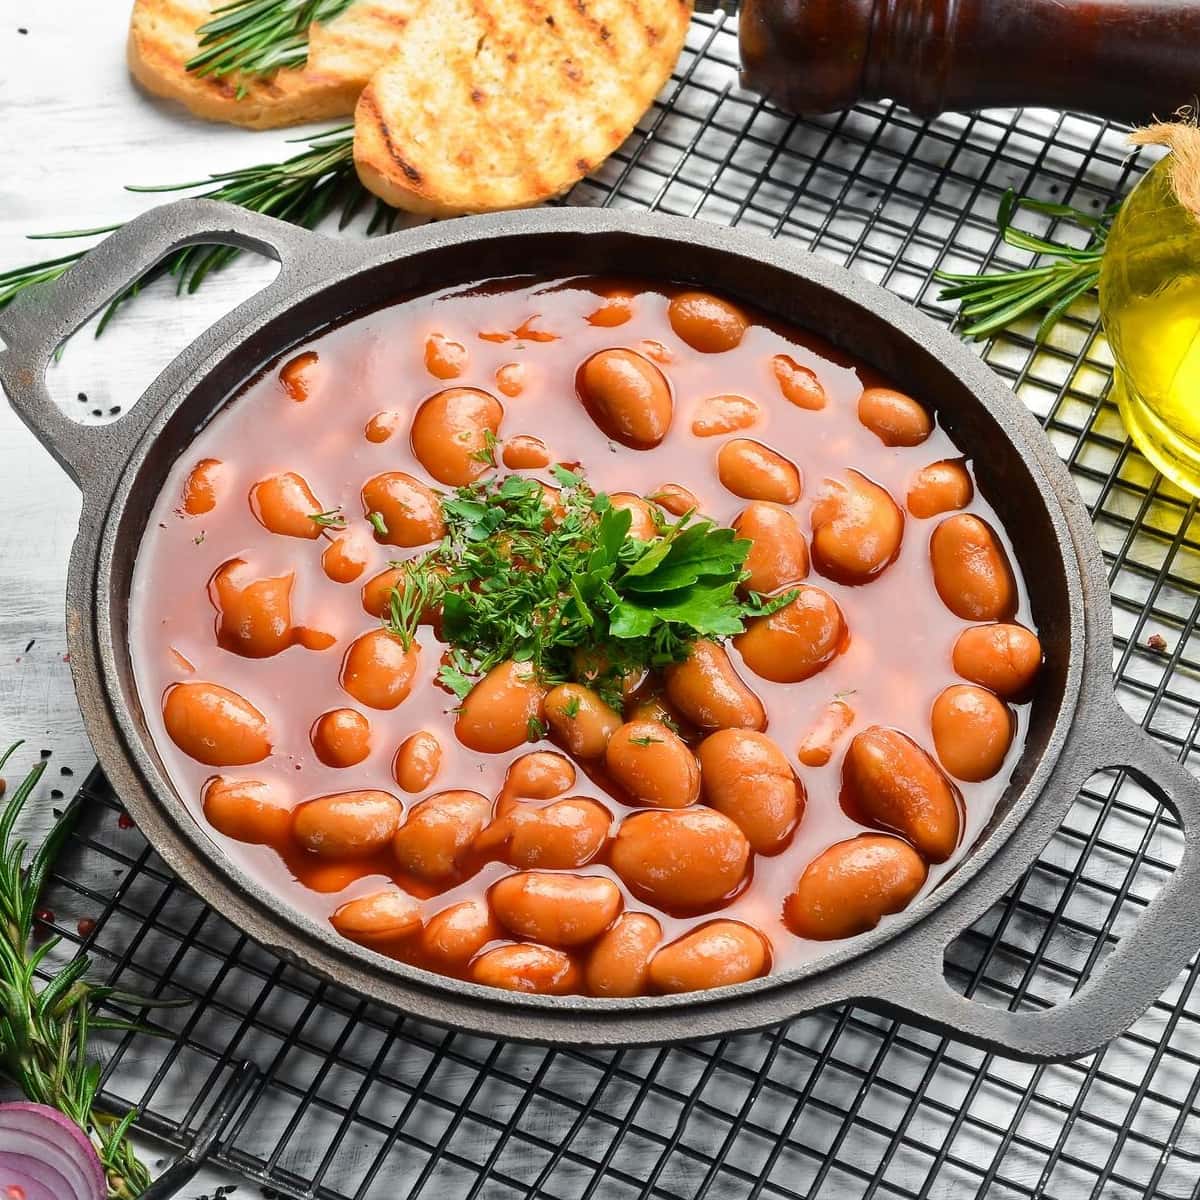 Cooked pinto beans in a metal plate.